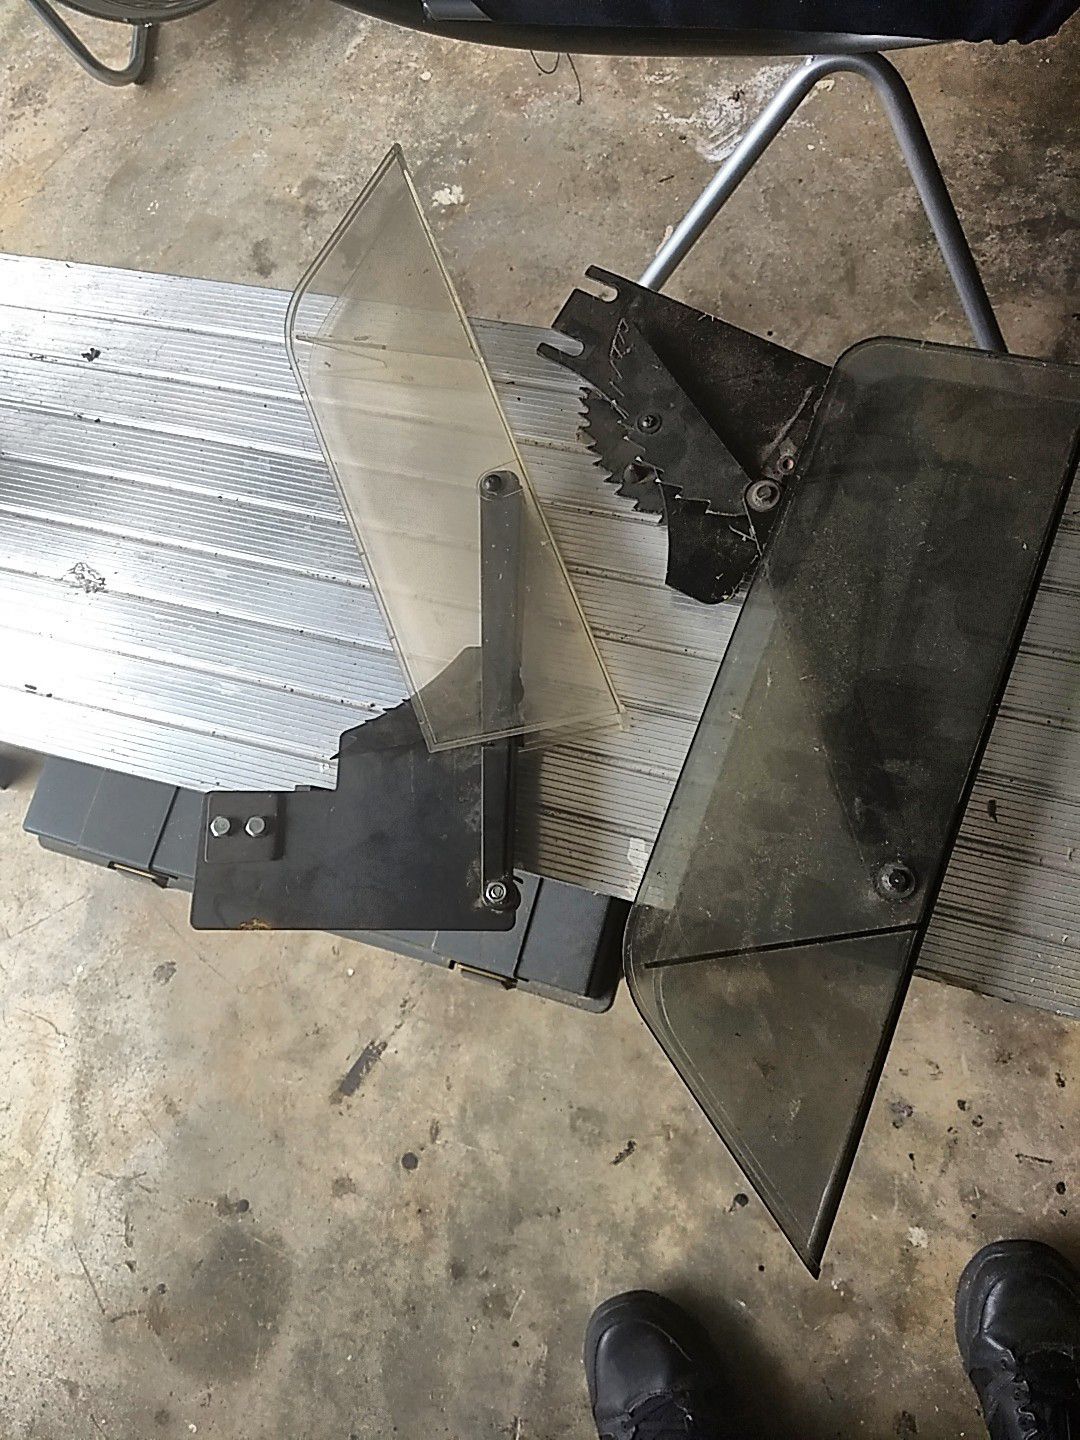 Two table saw blade guards